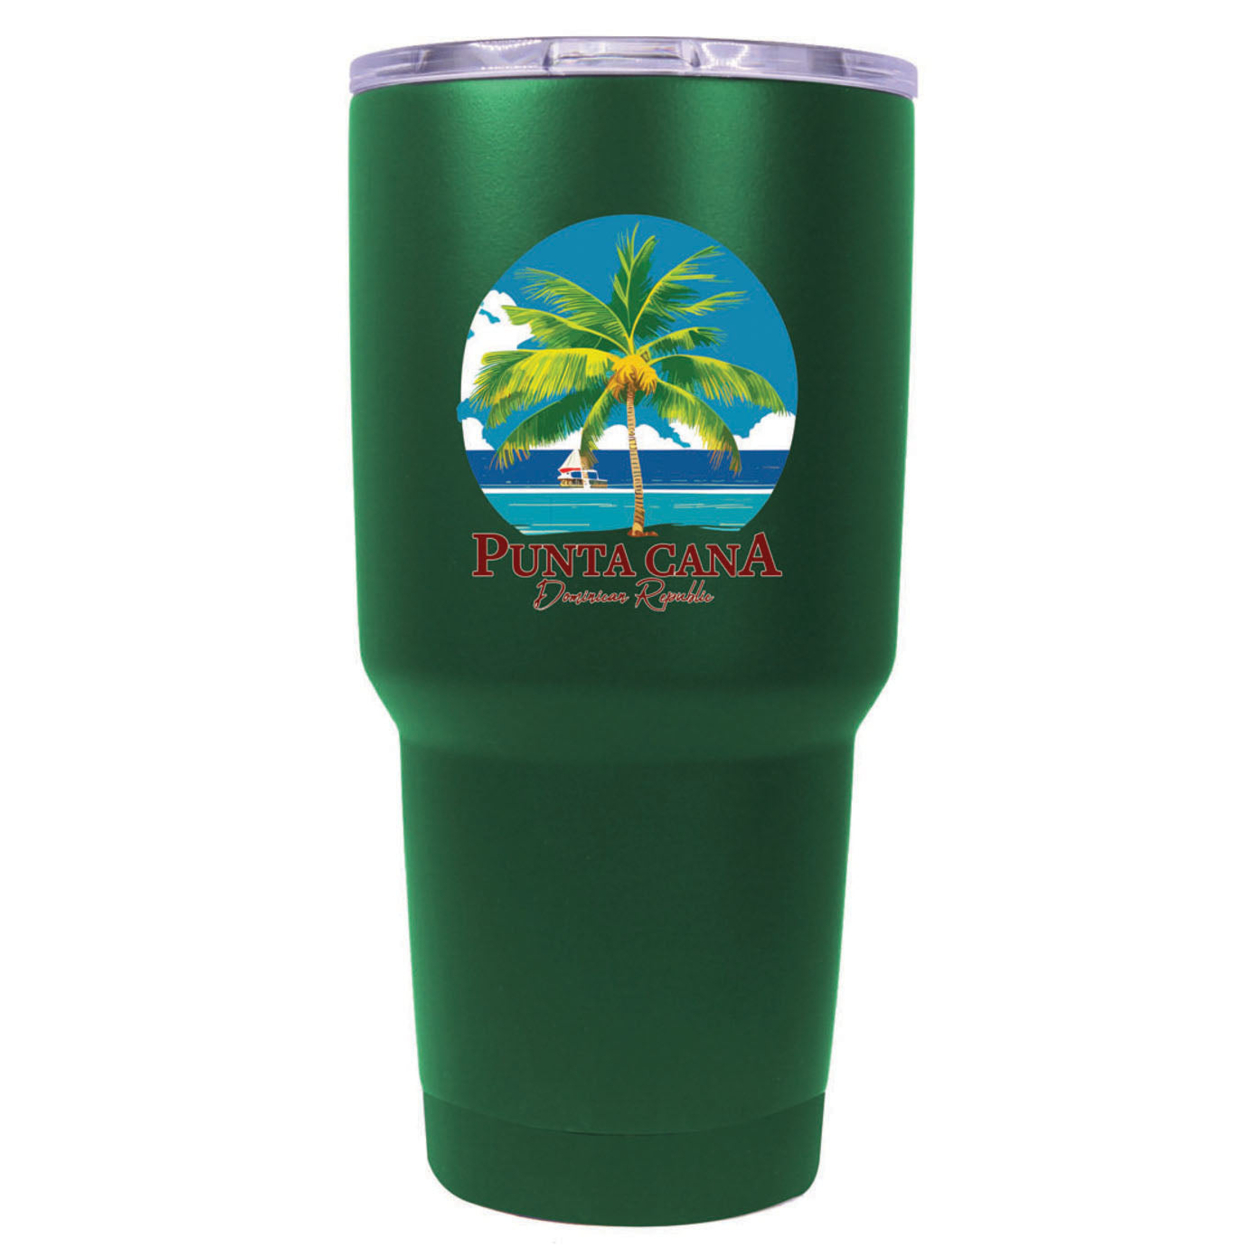 Punta Cana Dominican Republic Souvenir 24 Oz Insulated Stainless Steel Tumbler - Black, PARROT B